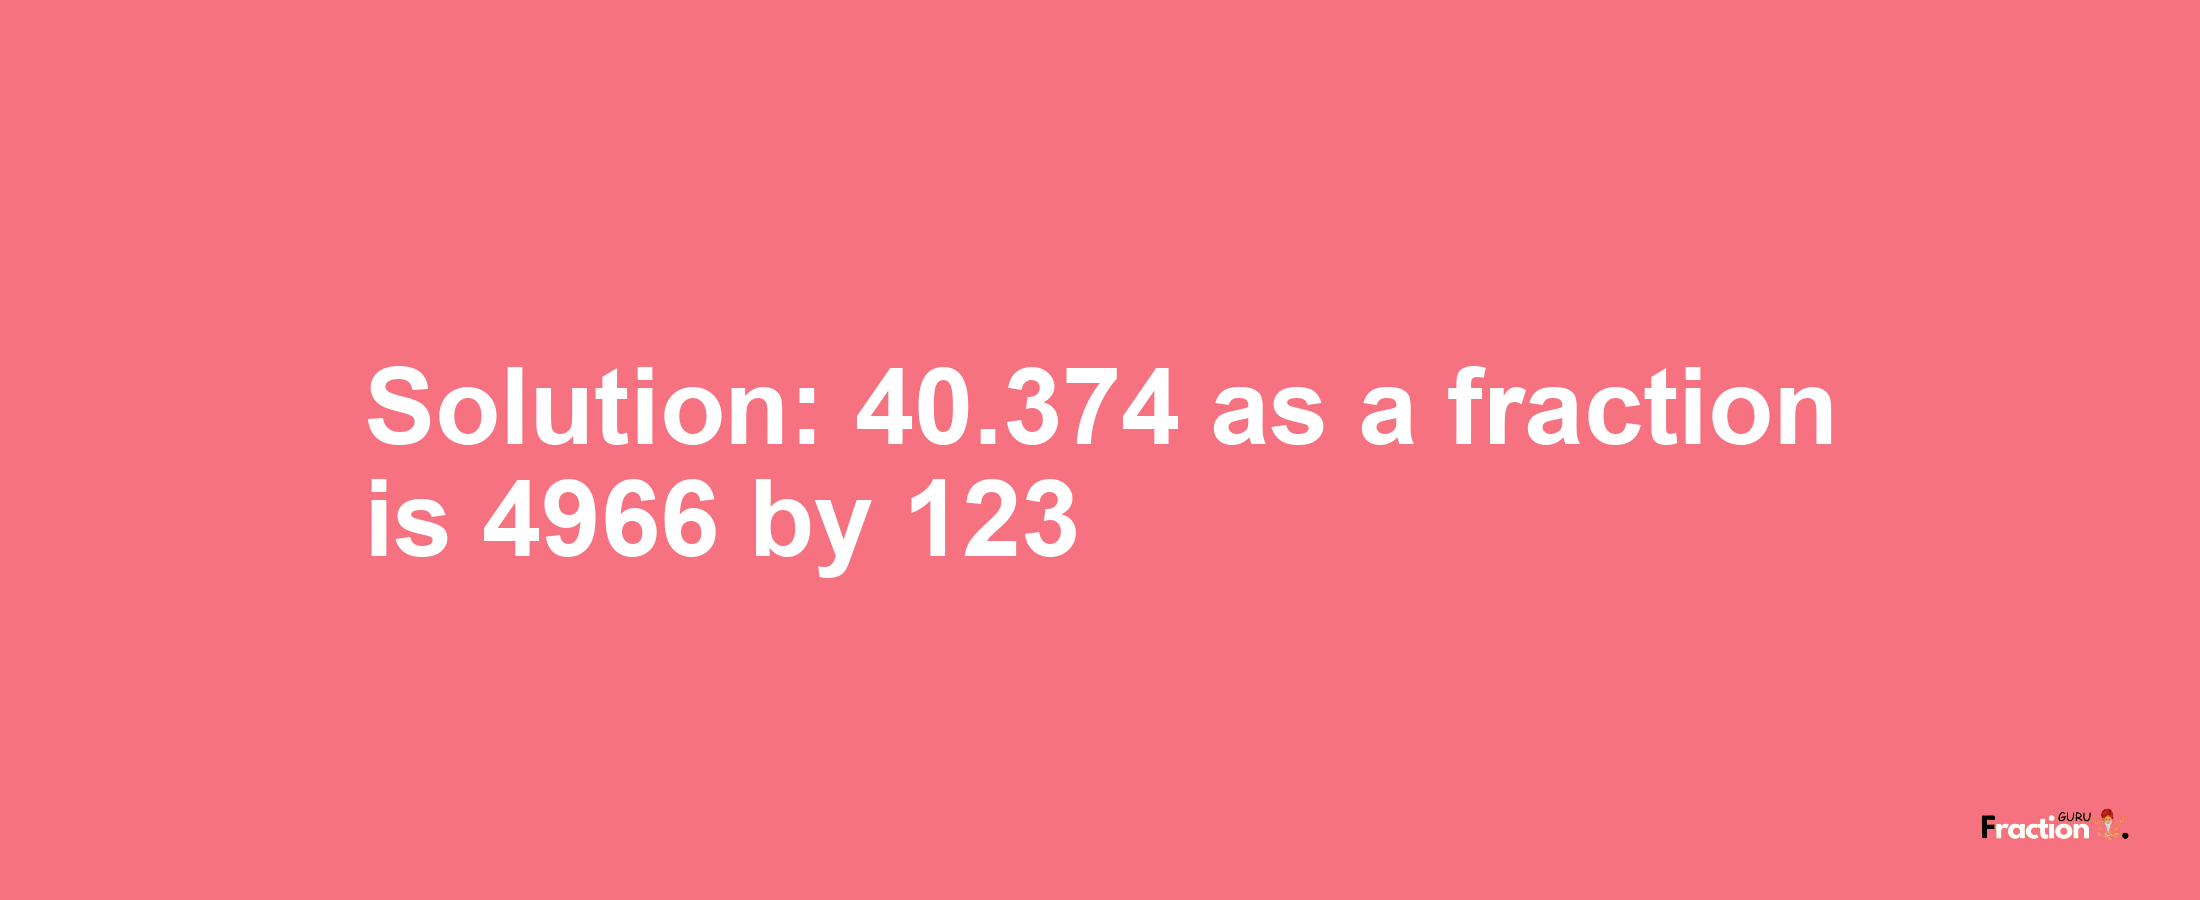 Solution:40.374 as a fraction is 4966/123